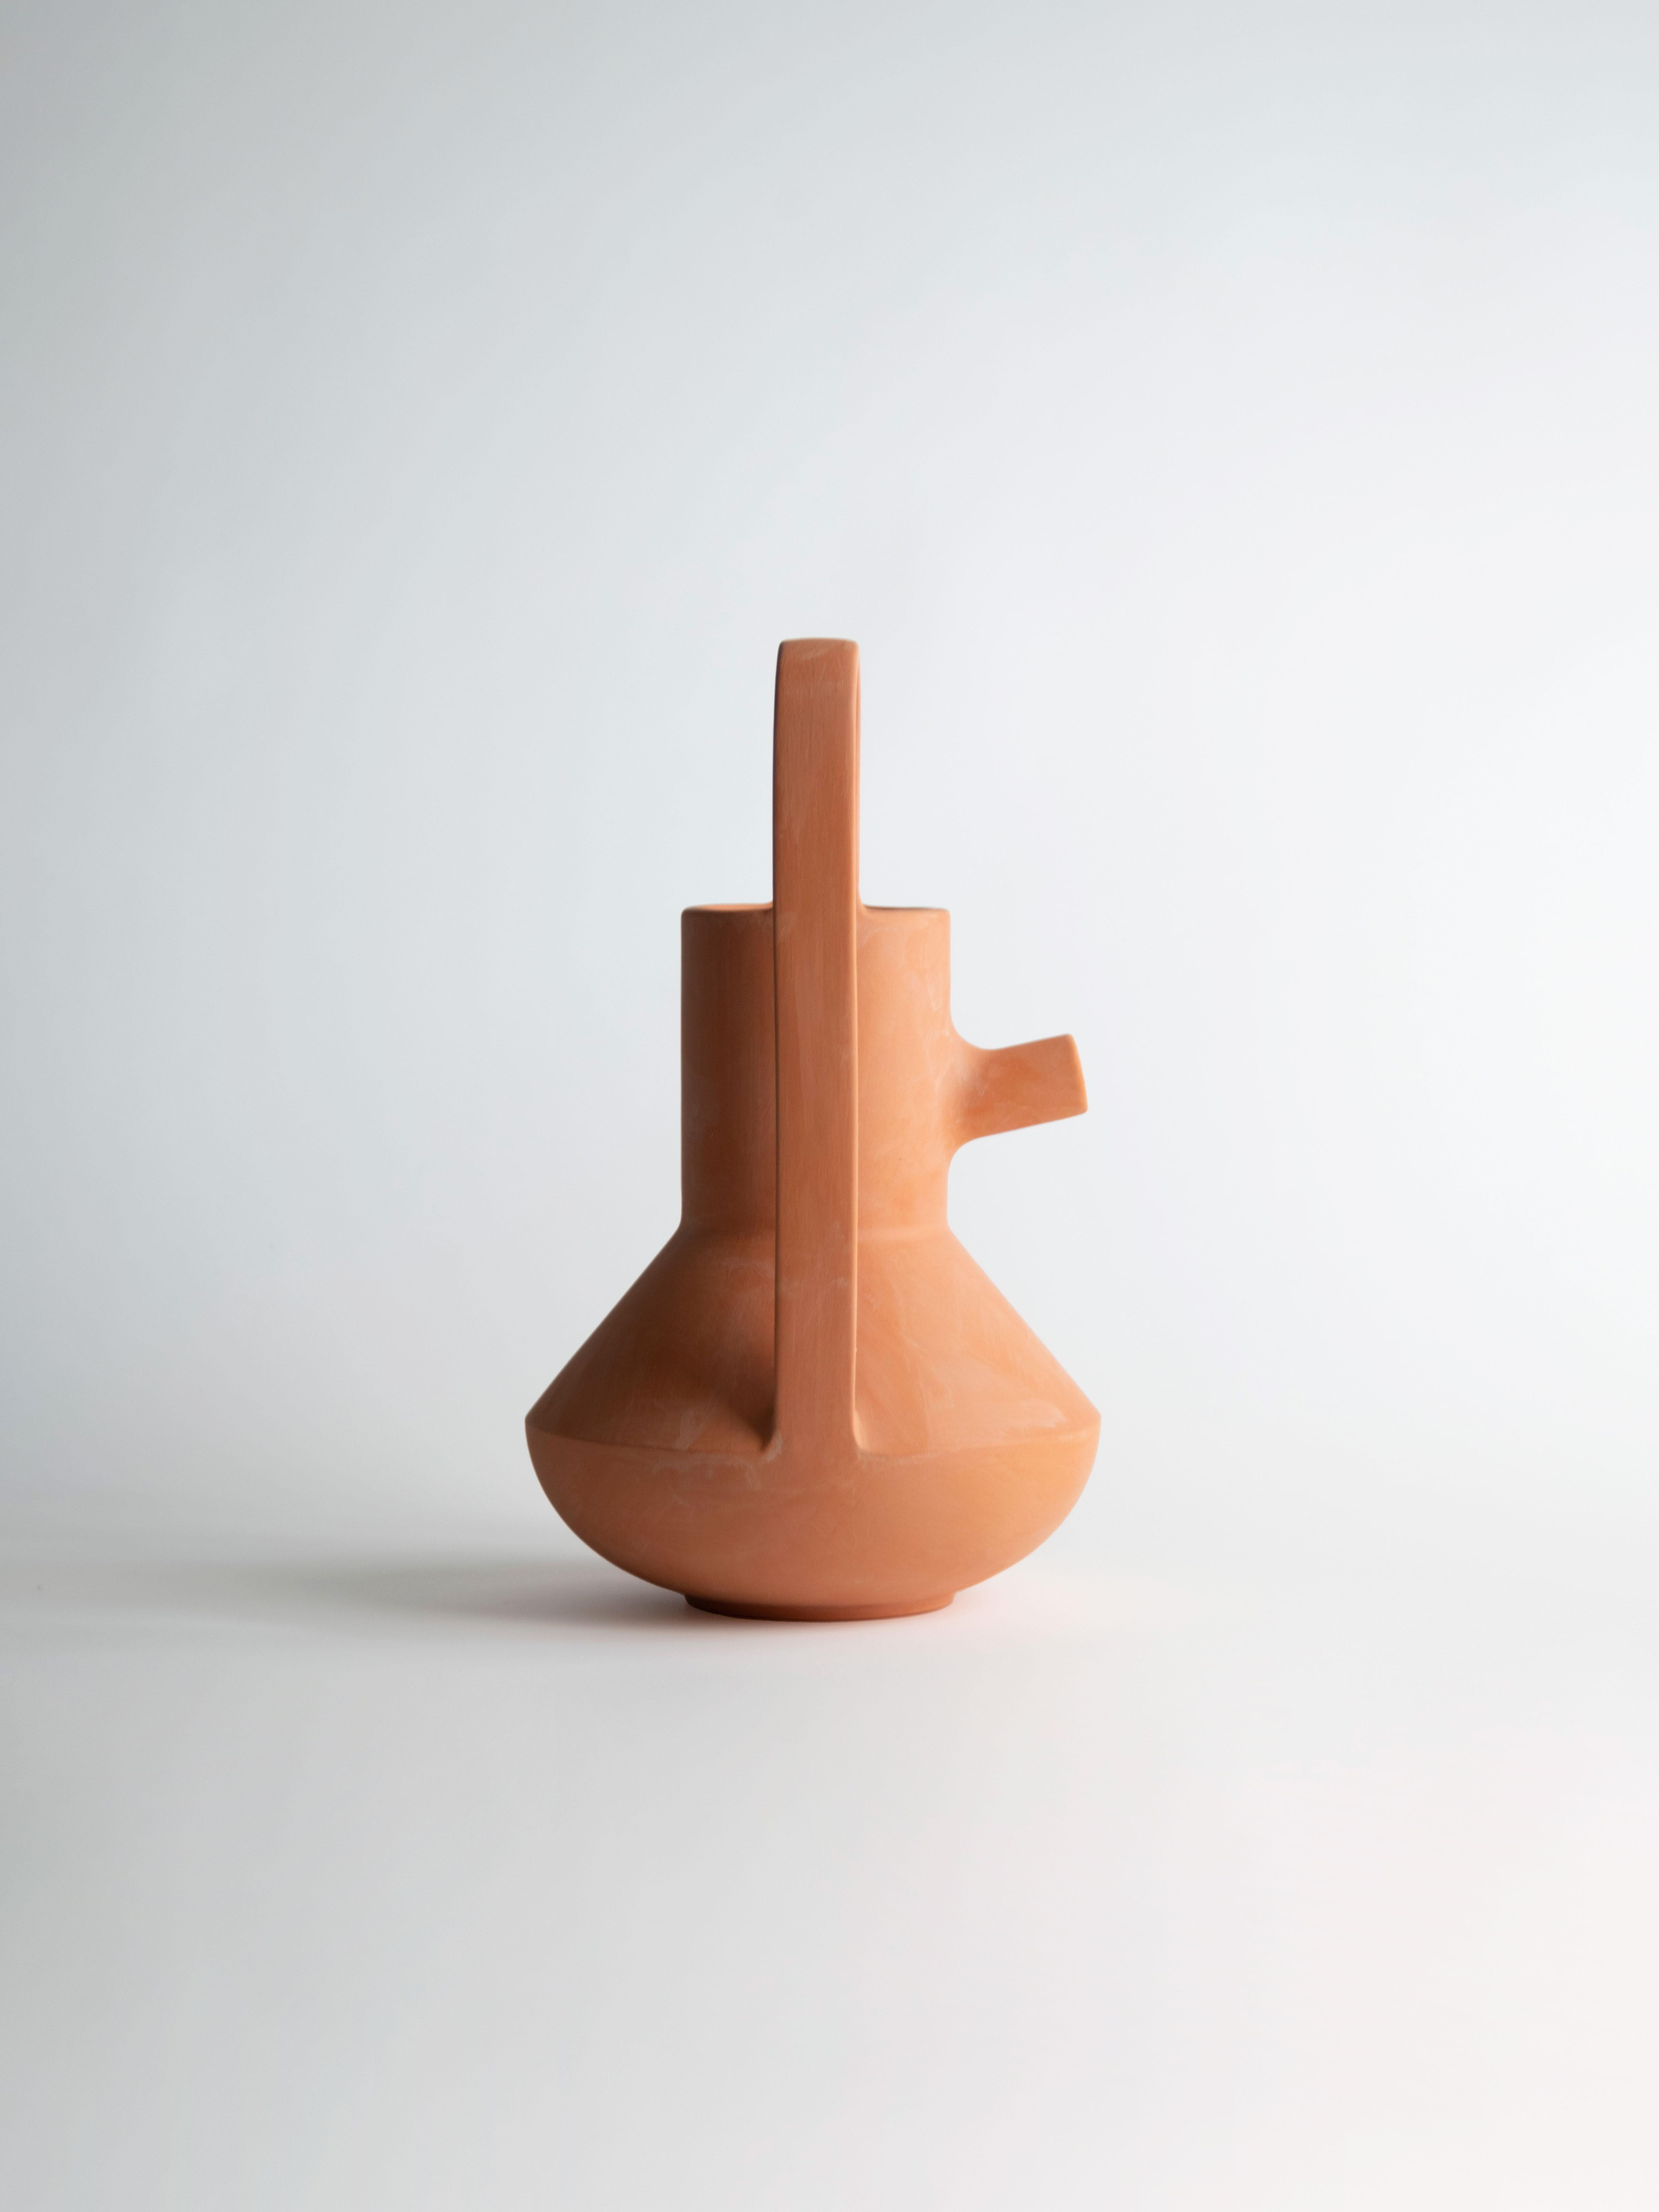 Cannate 2 Pot by Secondome Edizioni
Designer: Giulio Iacchetti.
Dimensions: Ø 27 x H 37 cm.
Materials: Clay. 

Collection / Production: Secondome. Available in different shapes. Please contact us.

THE GALLERY
Secondome is a Design Gallery focused